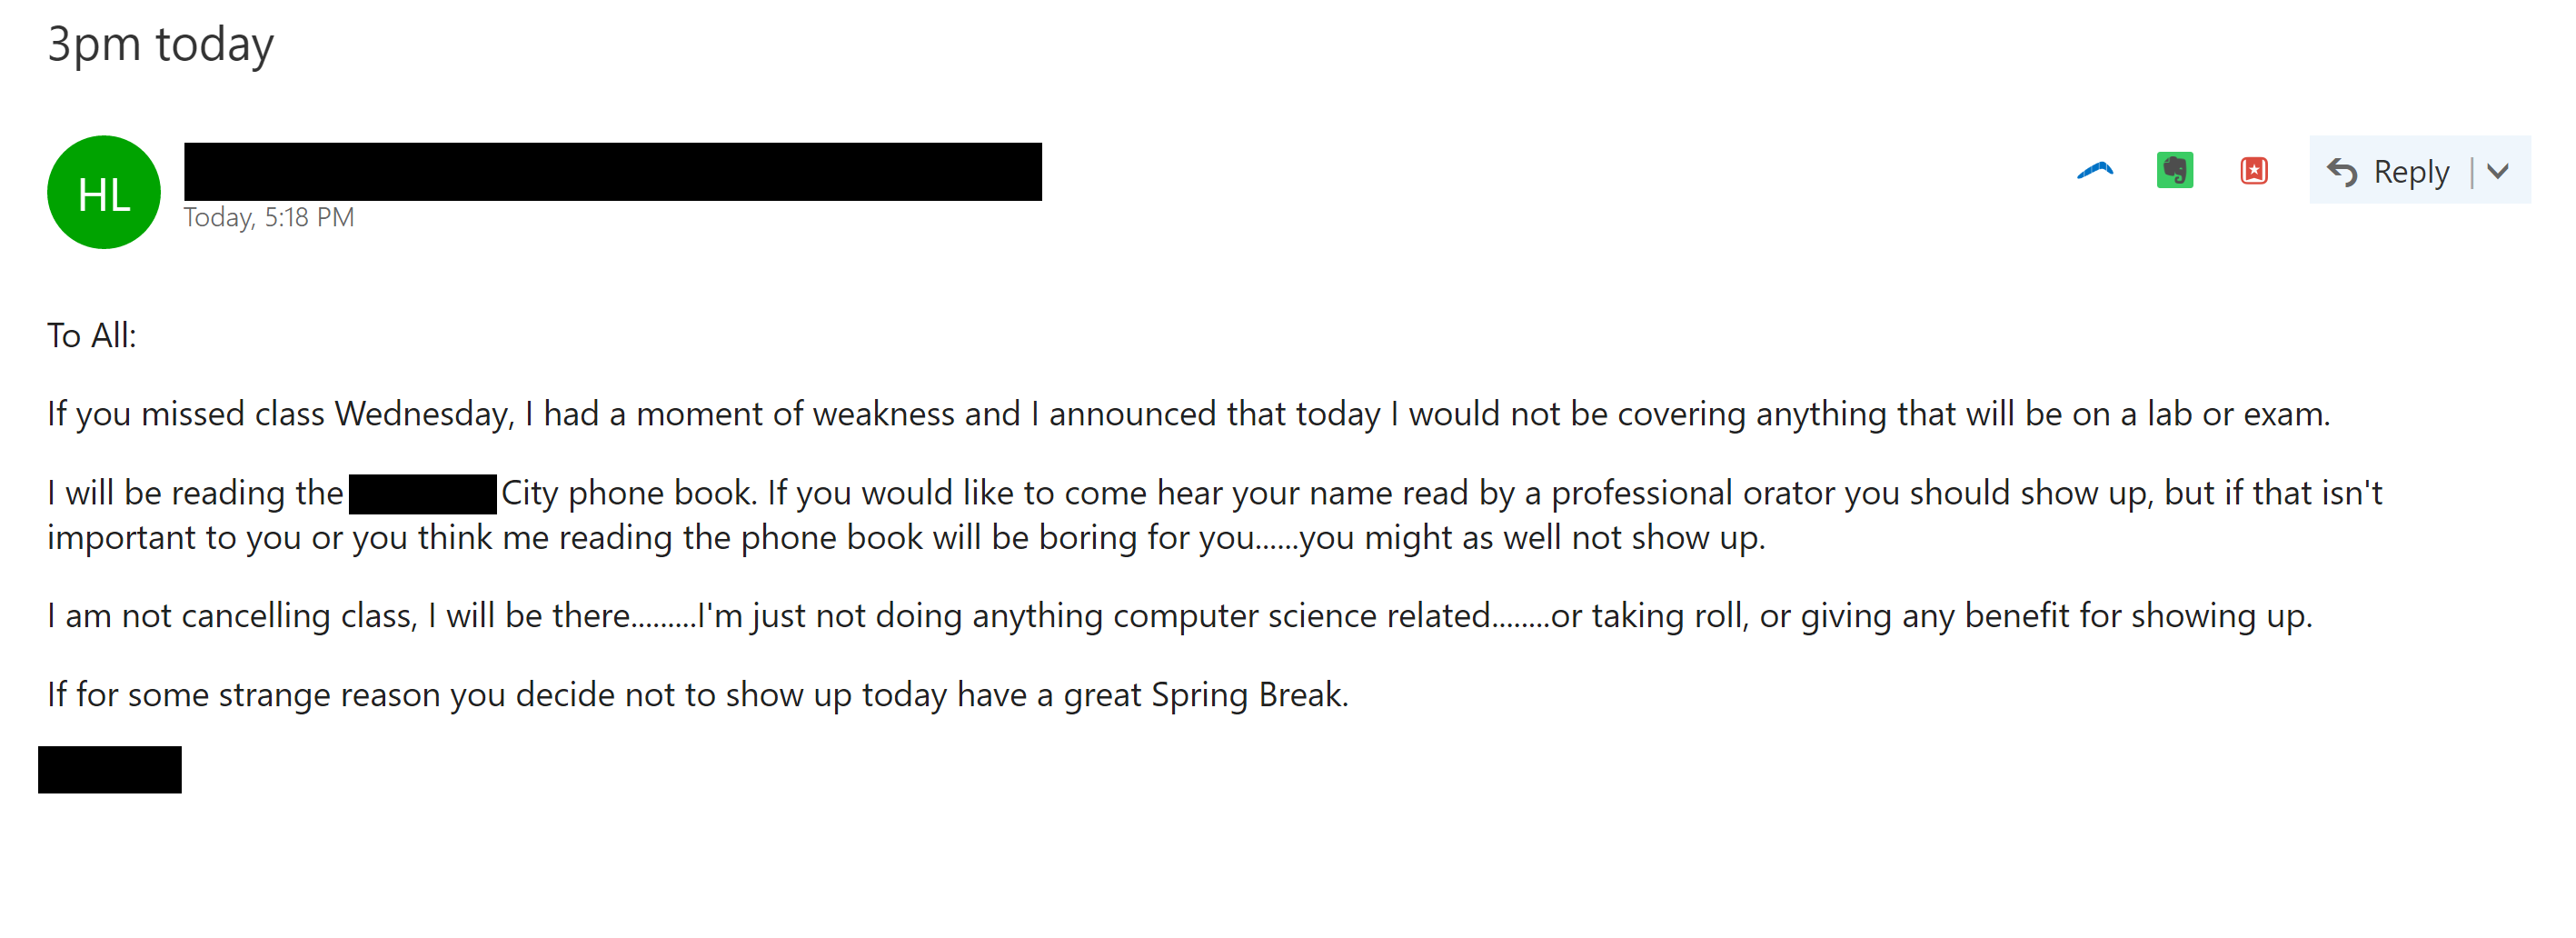 My professor wasn't allowed to cancel class before spring break. He sent this email to everyone in the class this morning.